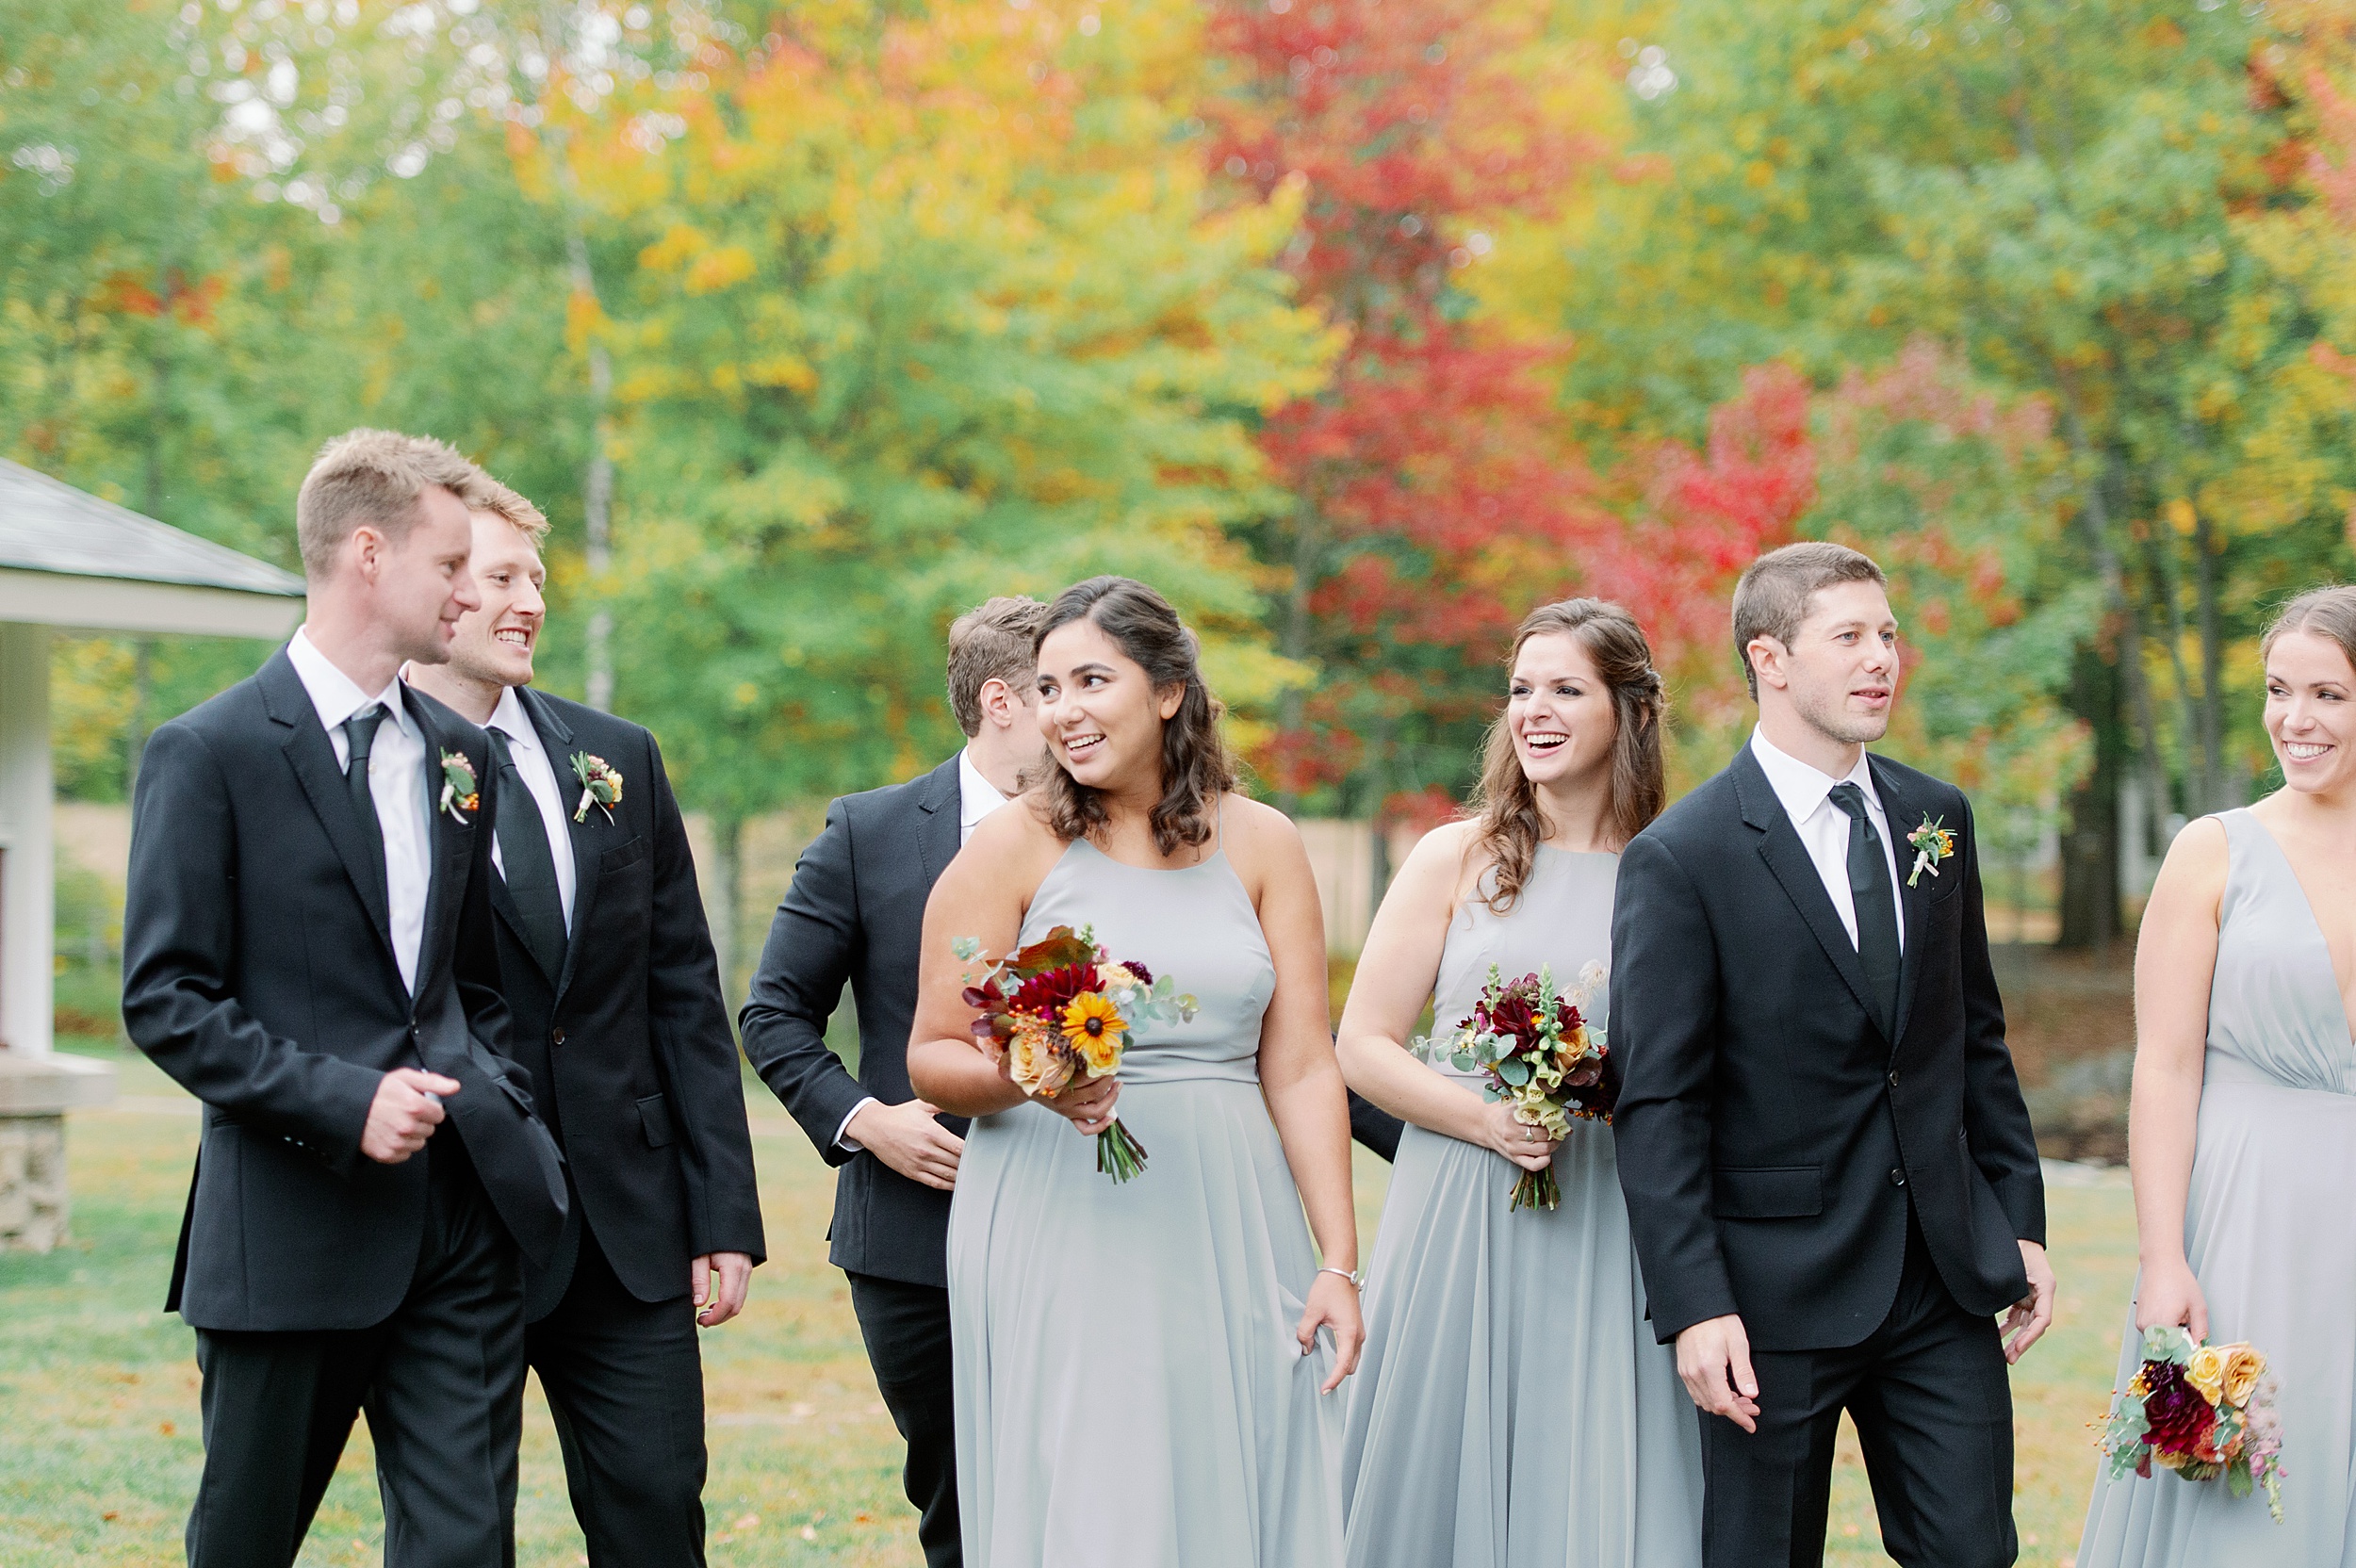 wedding party portraits in dove gray dresses and tuxes at The Stone Barn wedding in Maine